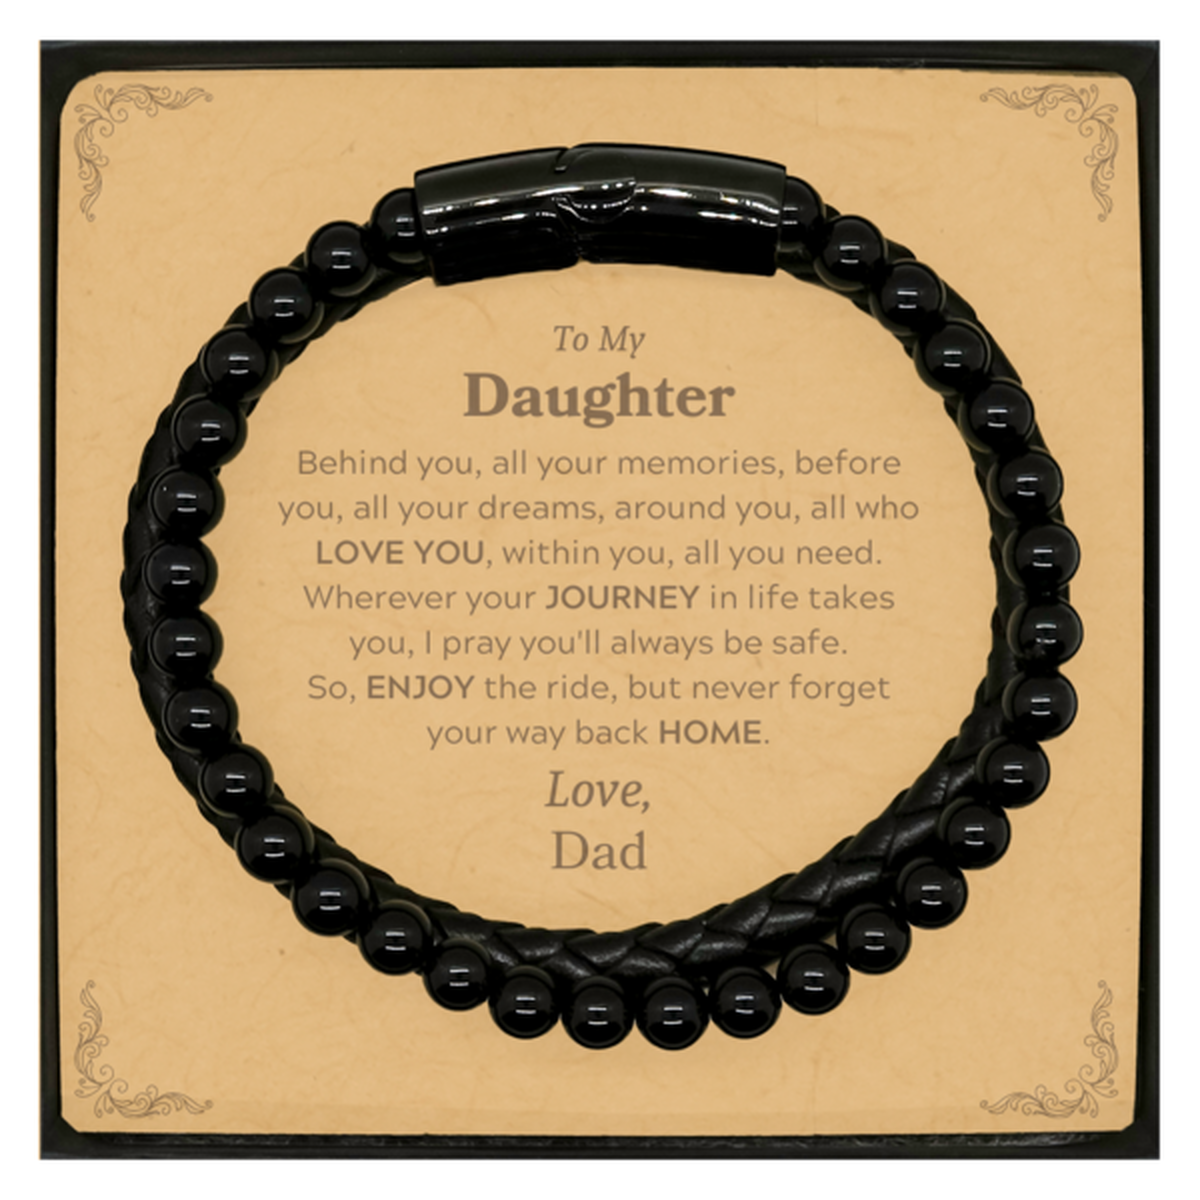 To My Daughter Graduation Gifts from Dad, Daughter Stone Leather Bracelets Christmas Birthday Gifts for Daughter Behind you, all your memories, before you, all your dreams. Love, Dad